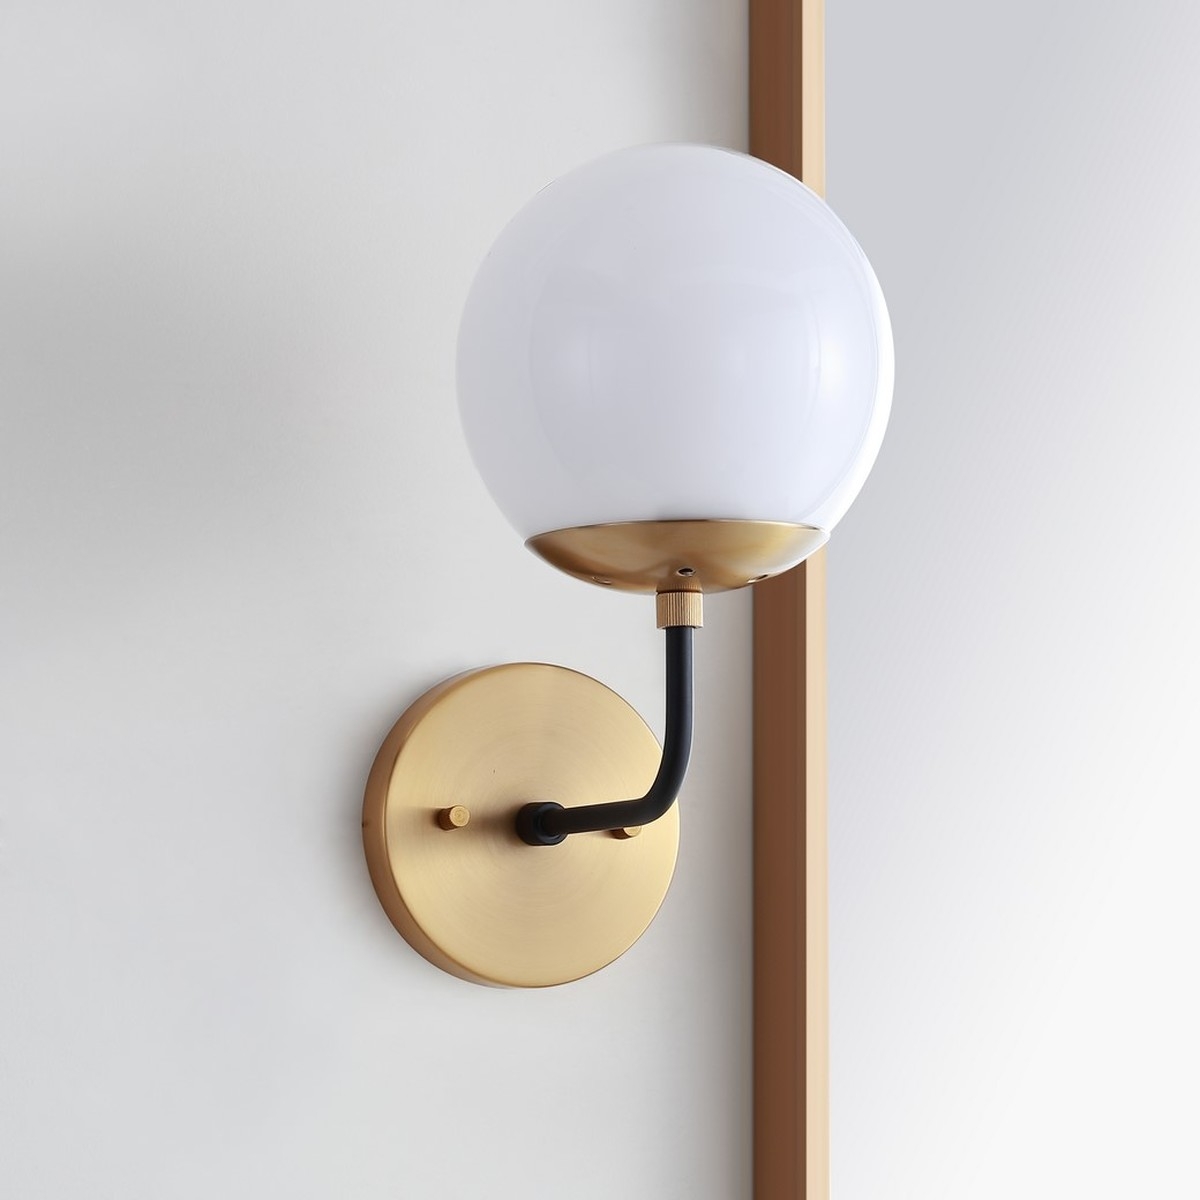 Cayden Wall Sconce - Brass - Arlo Home - Image 2